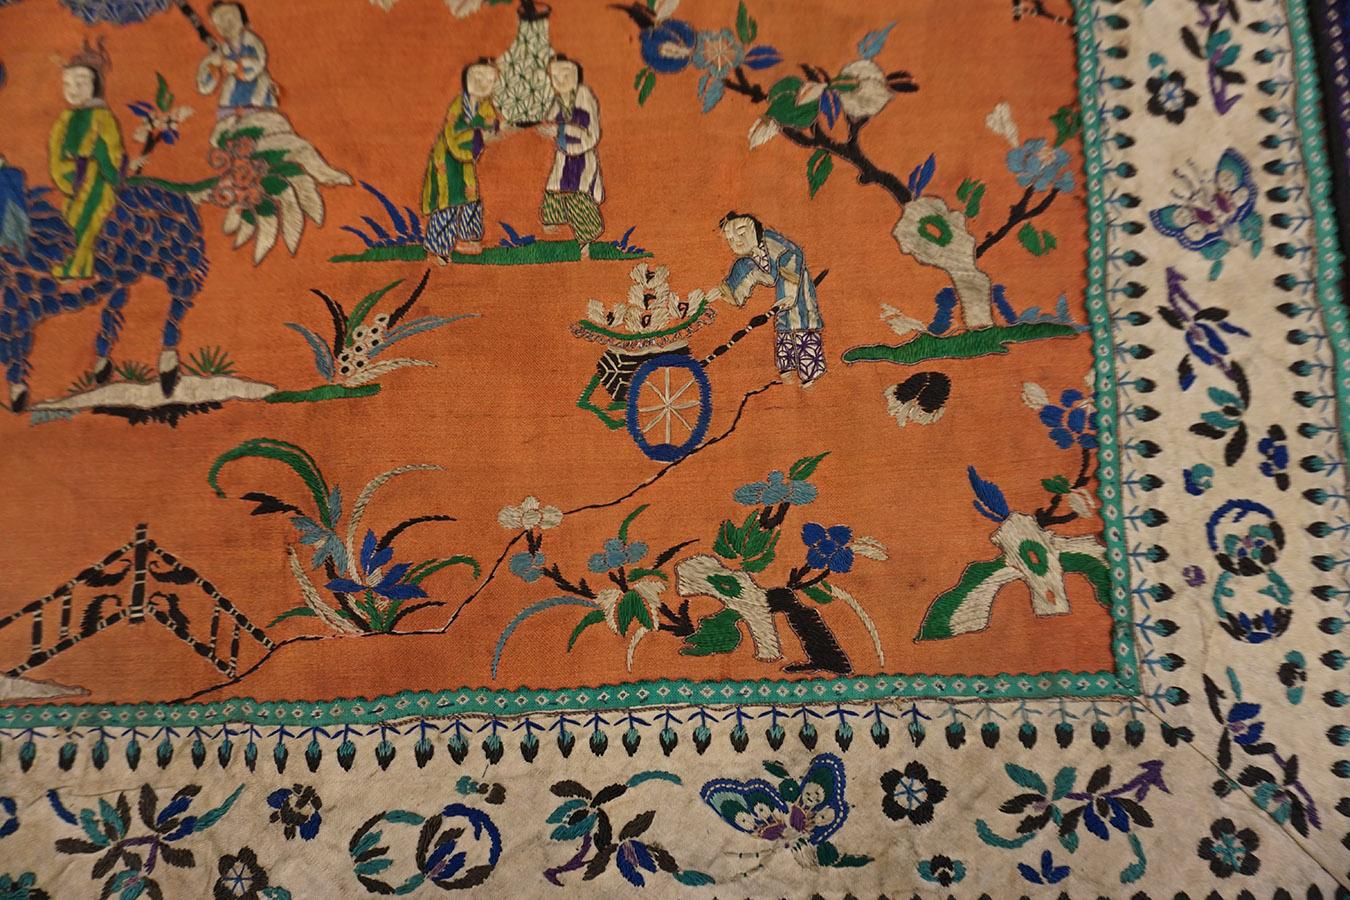 19th Century Chinese Silk Embroidery ( 1'6